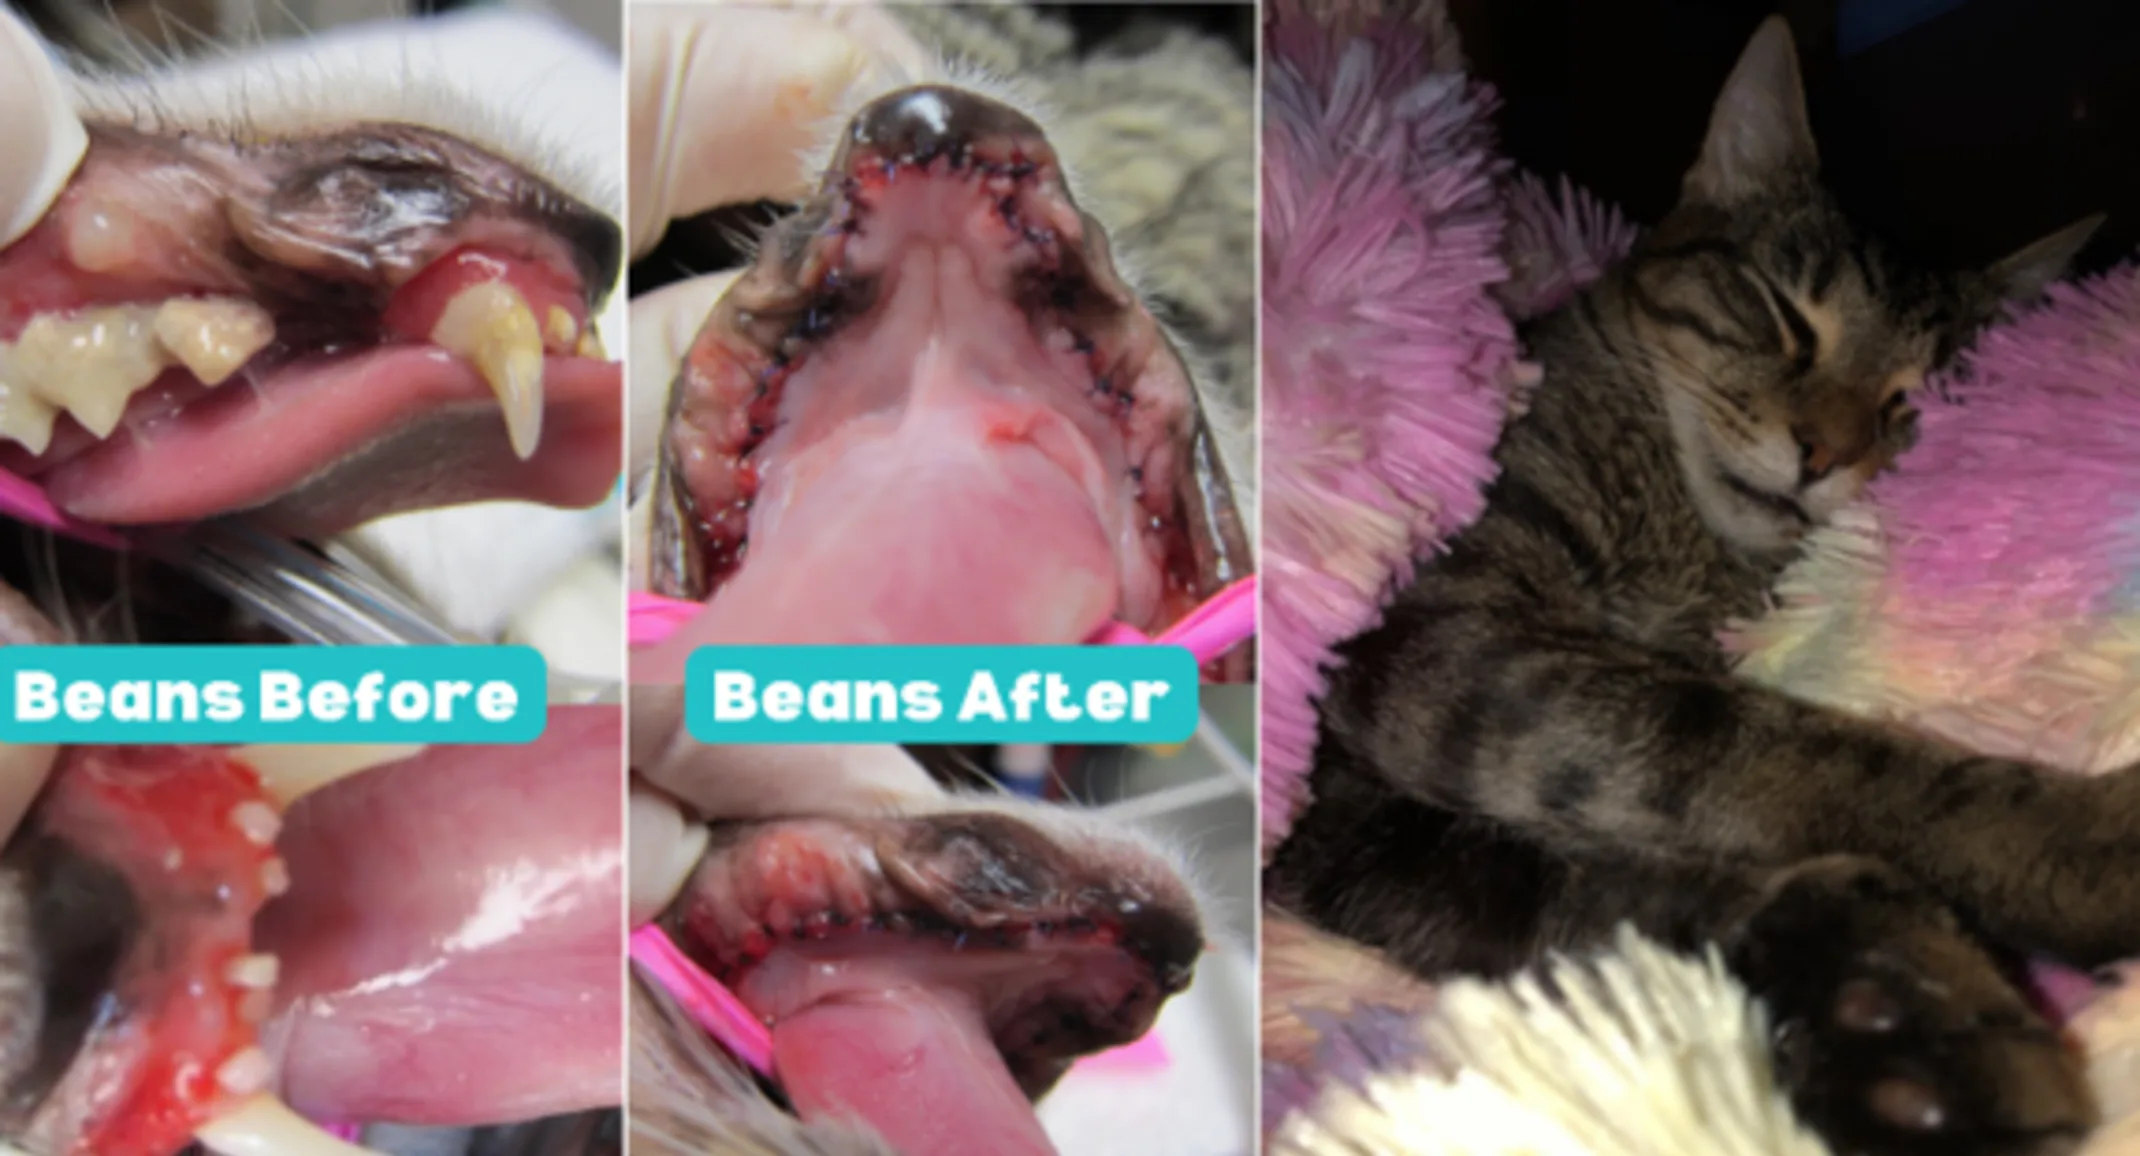 Bean's before and after dental images